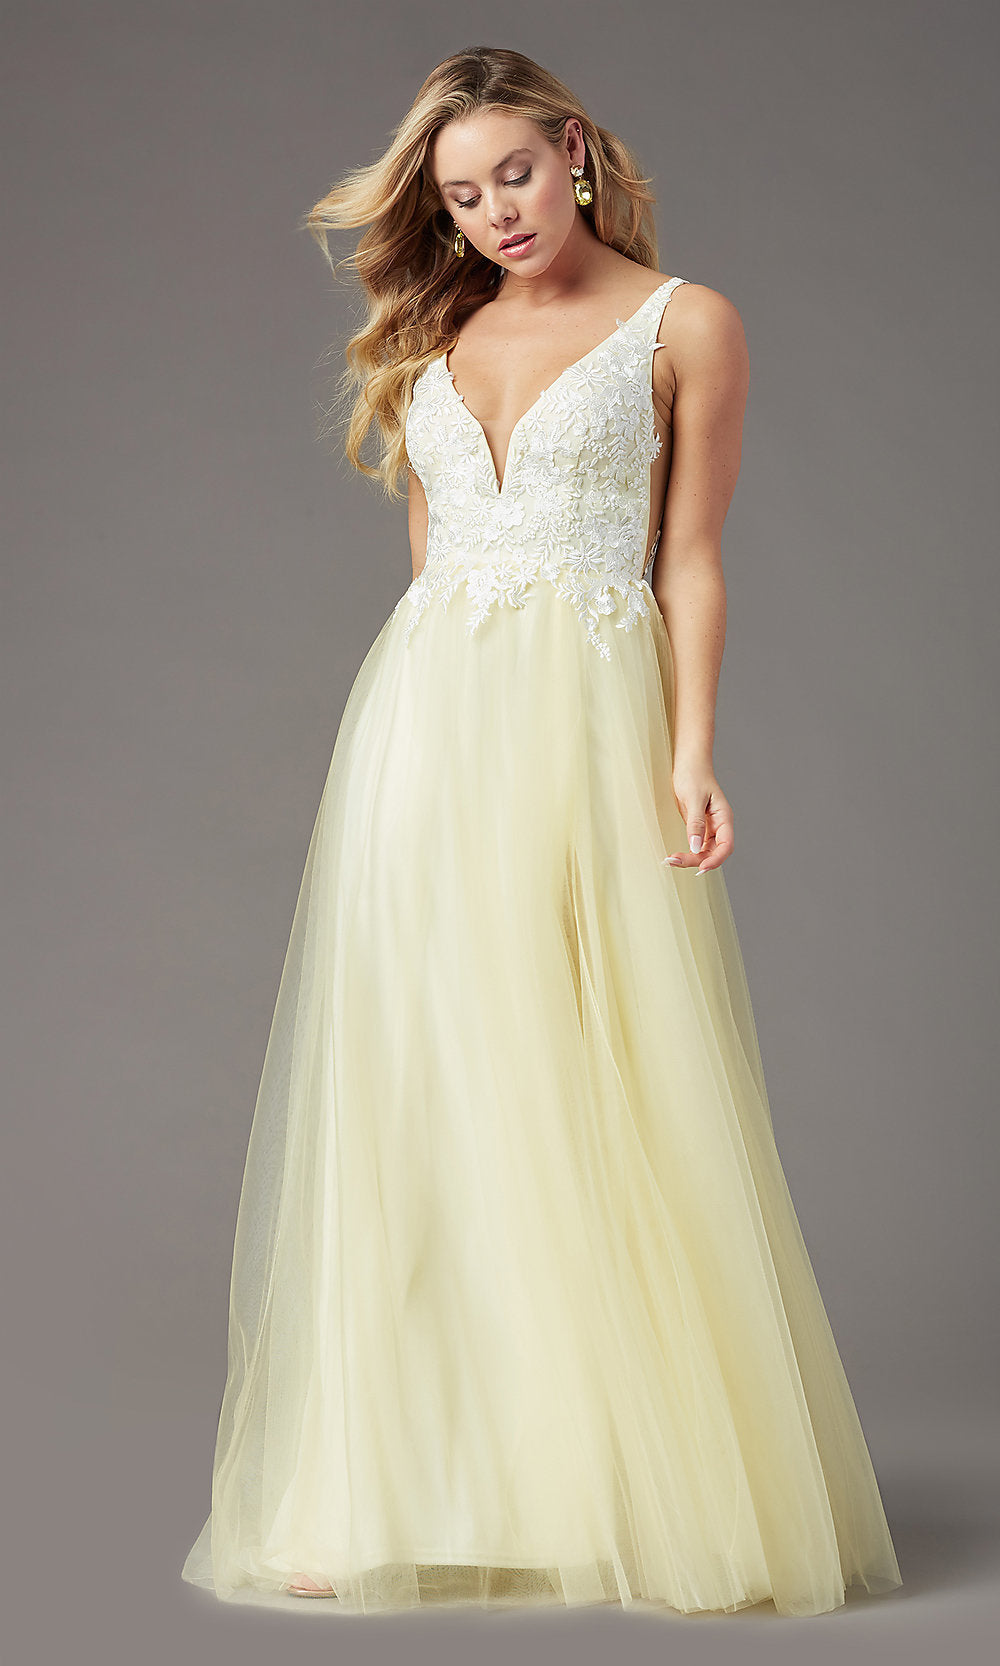  Long Tulle Embroidered-Bodice Prom Dress by PromGirl